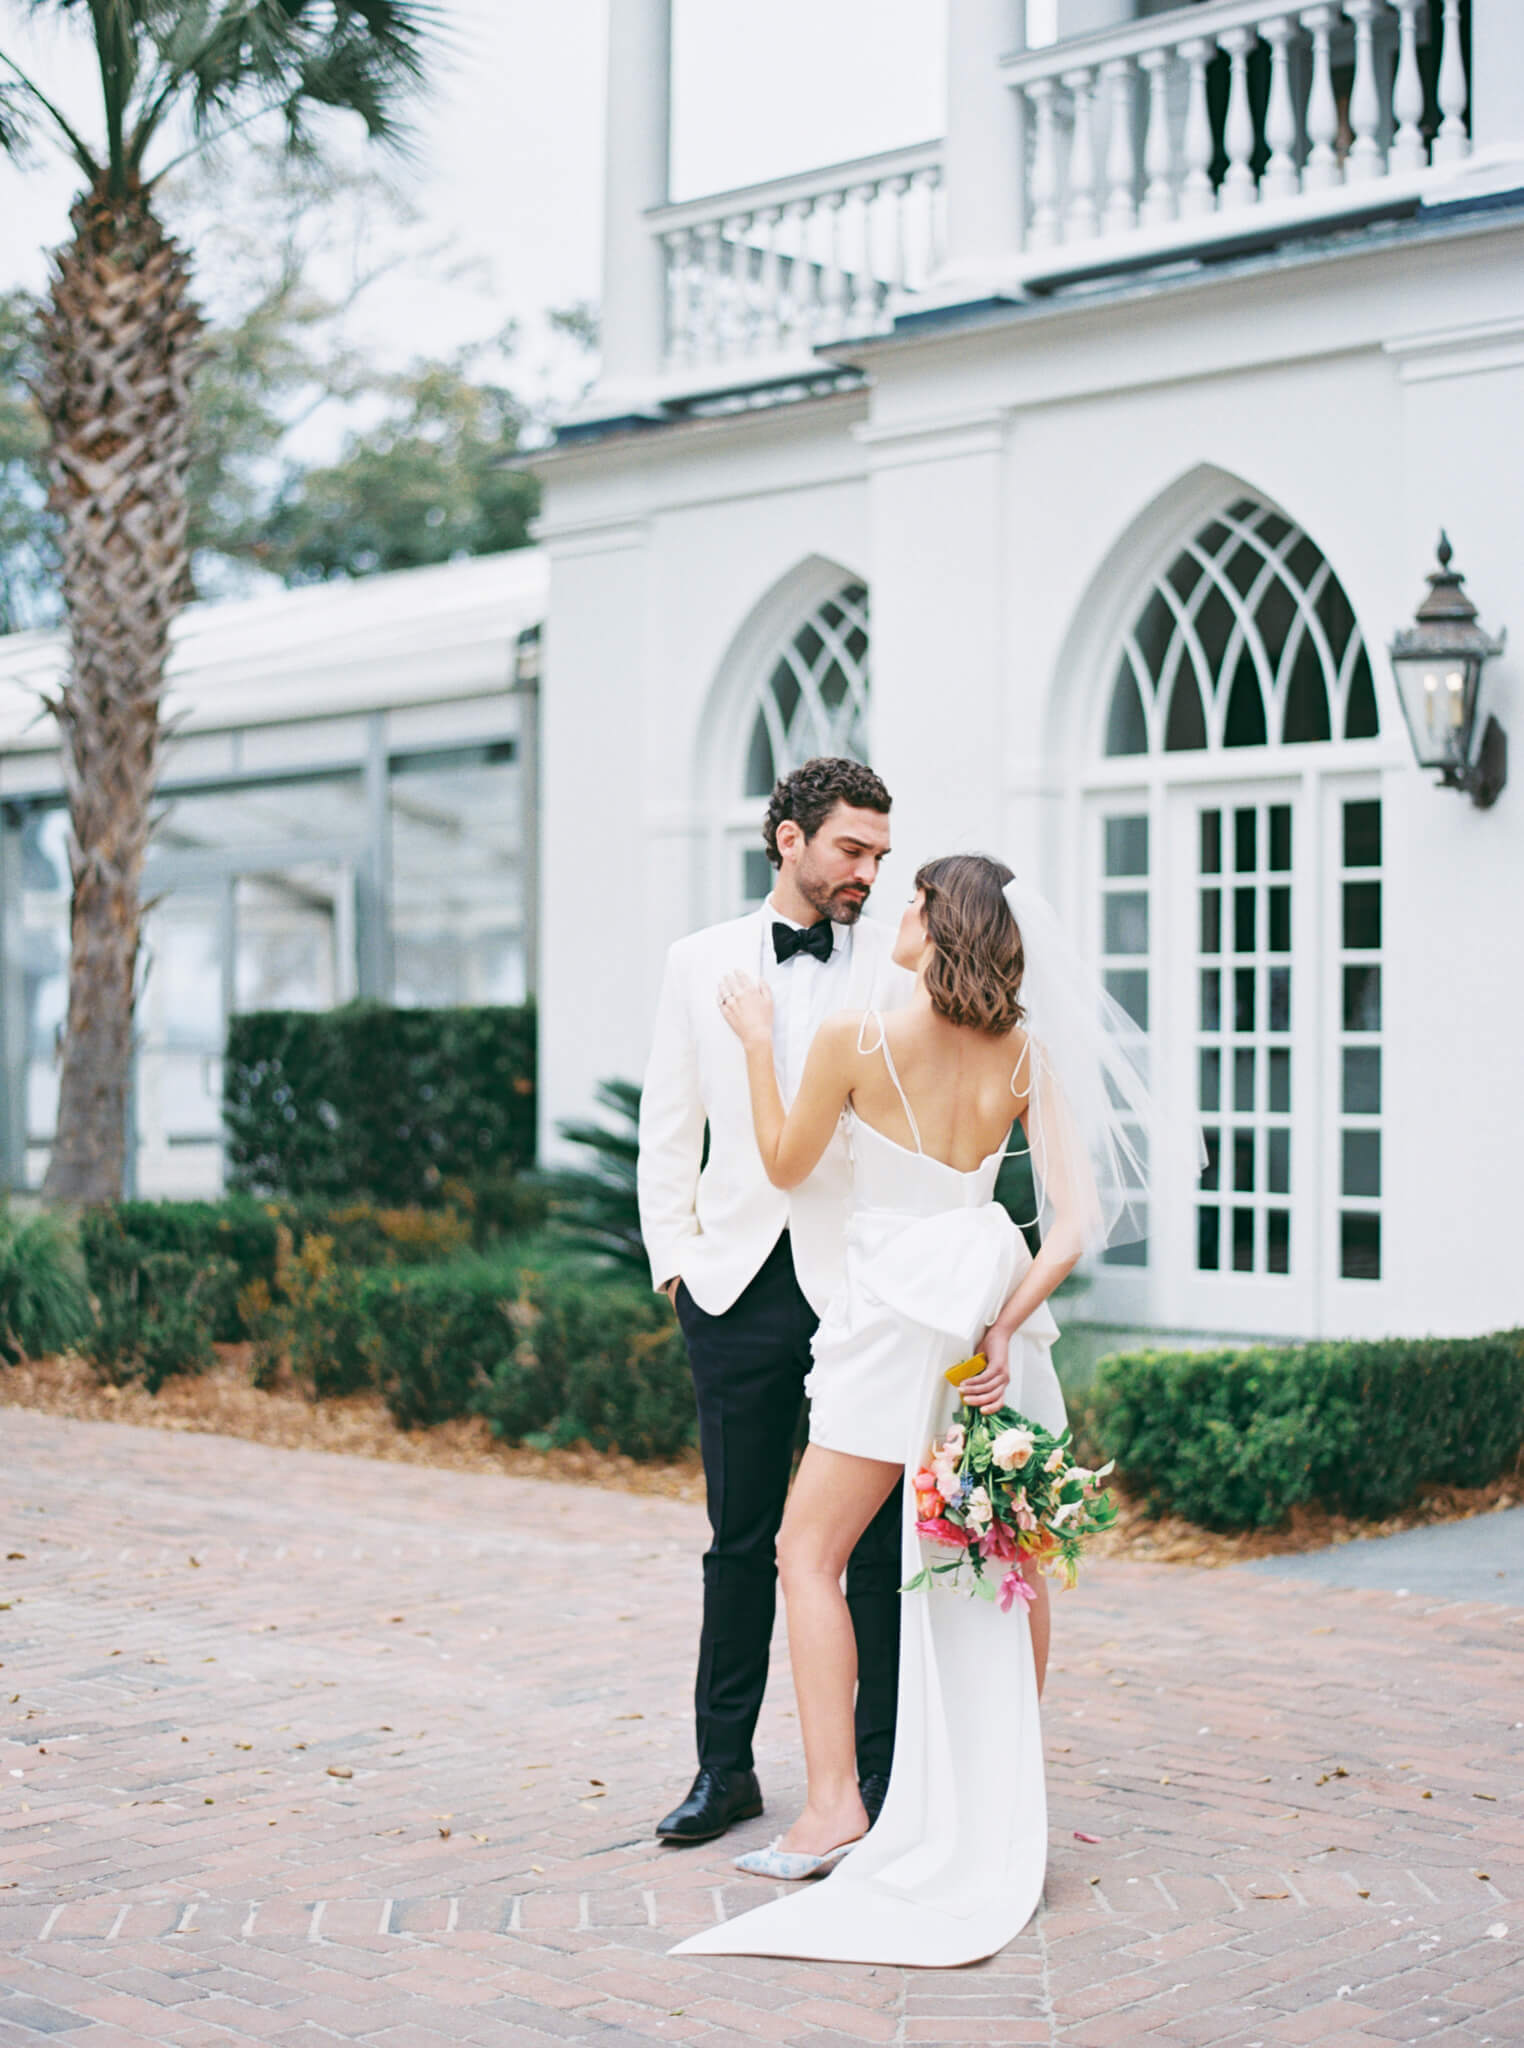 A bride in a short dress and groom in a tux embracing in front of Lowndes Grove wedding venue.